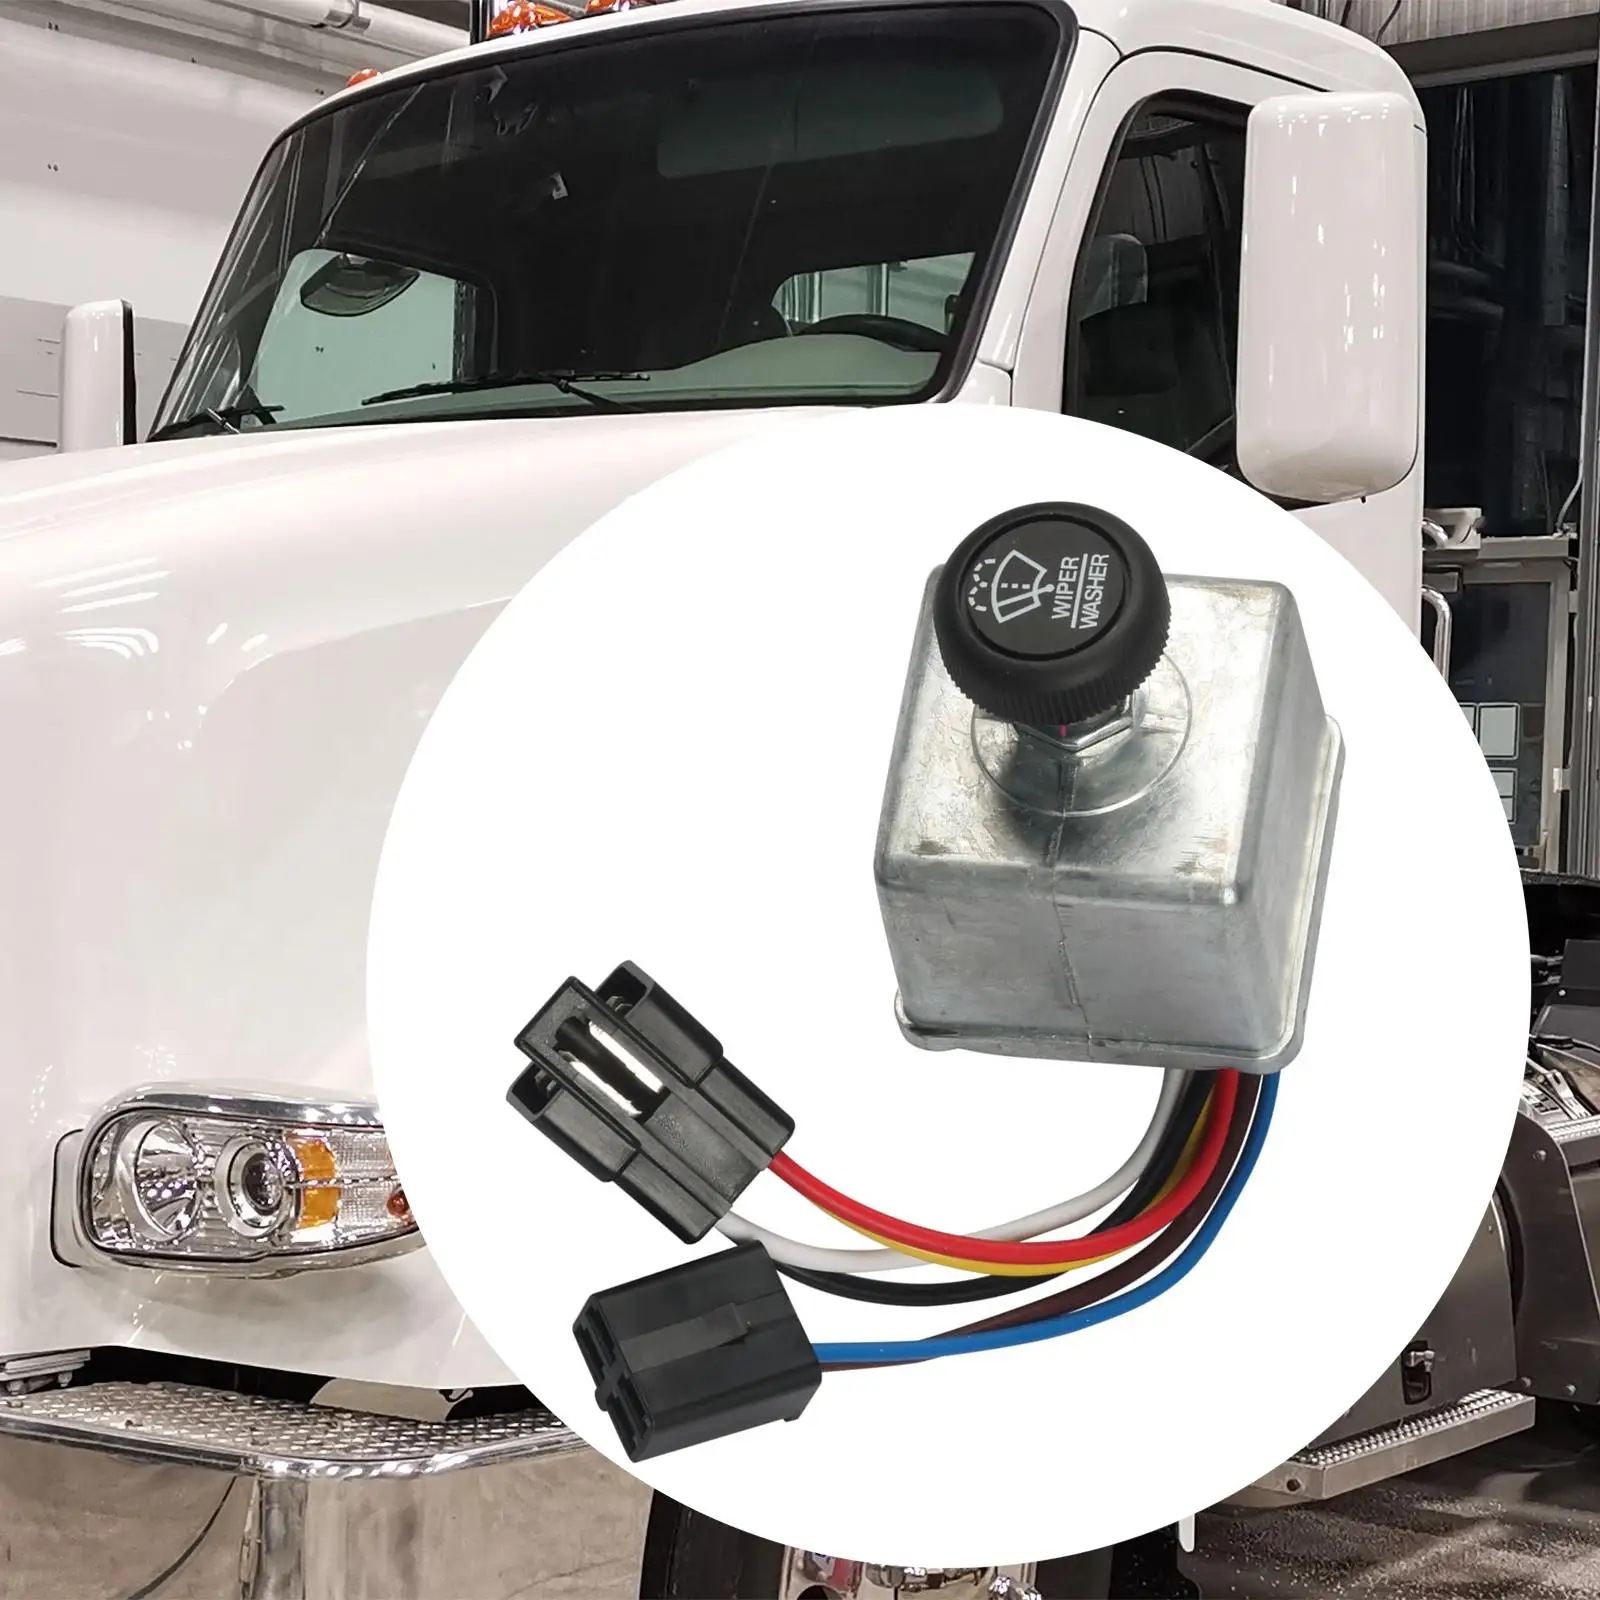 

Windshield Wiper Switch Lightweight Sturdy Replacement Parts 7560026 for Peterbilt Automotive Accessories Easy Installation